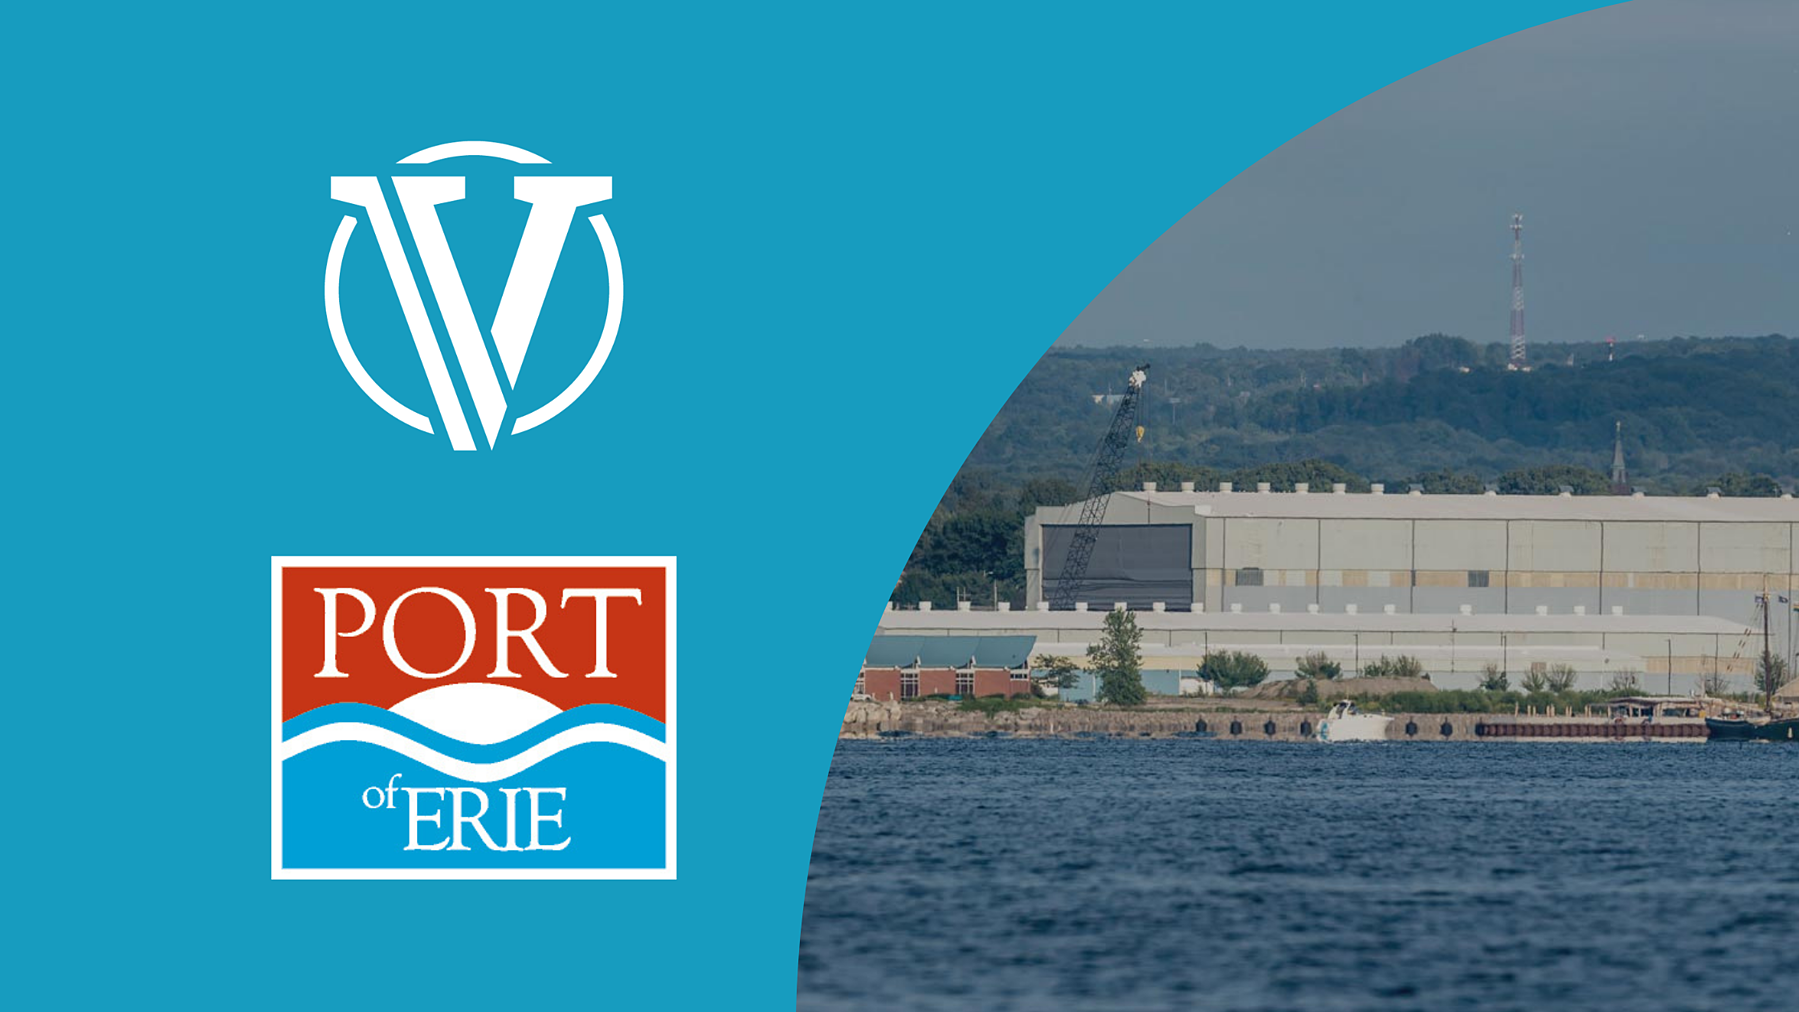 Valentis Awarded Contract to Provide Security and Consulting to the Port of Erie